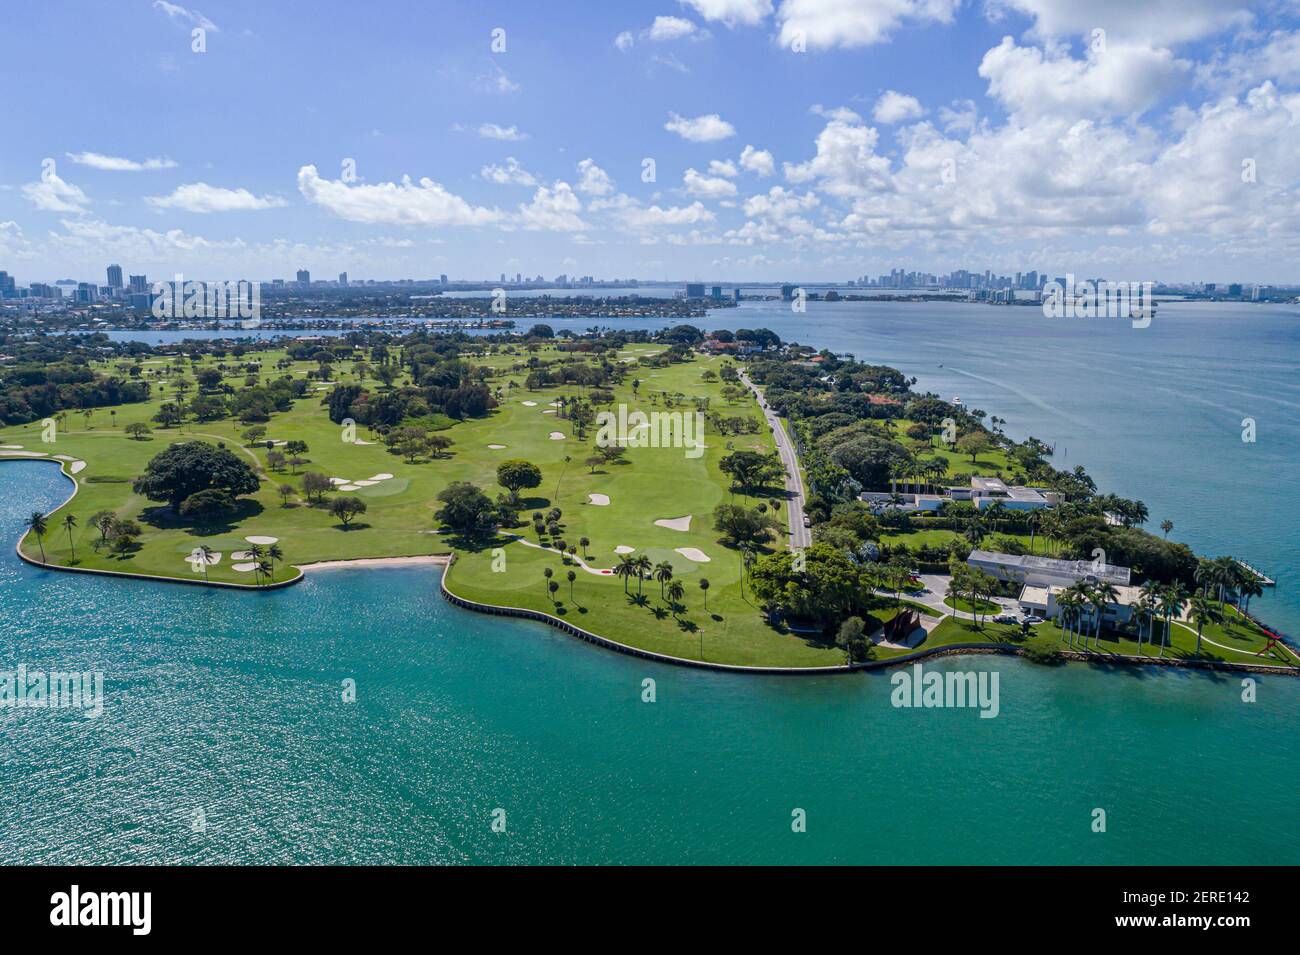 Miami Florida,Indian Creek Water Island Lake Biscayne Bay Water,Country Club Golf course,milliardaires Bunker,Ivanka Trump Jarrett Kushner future home Banque D'Images